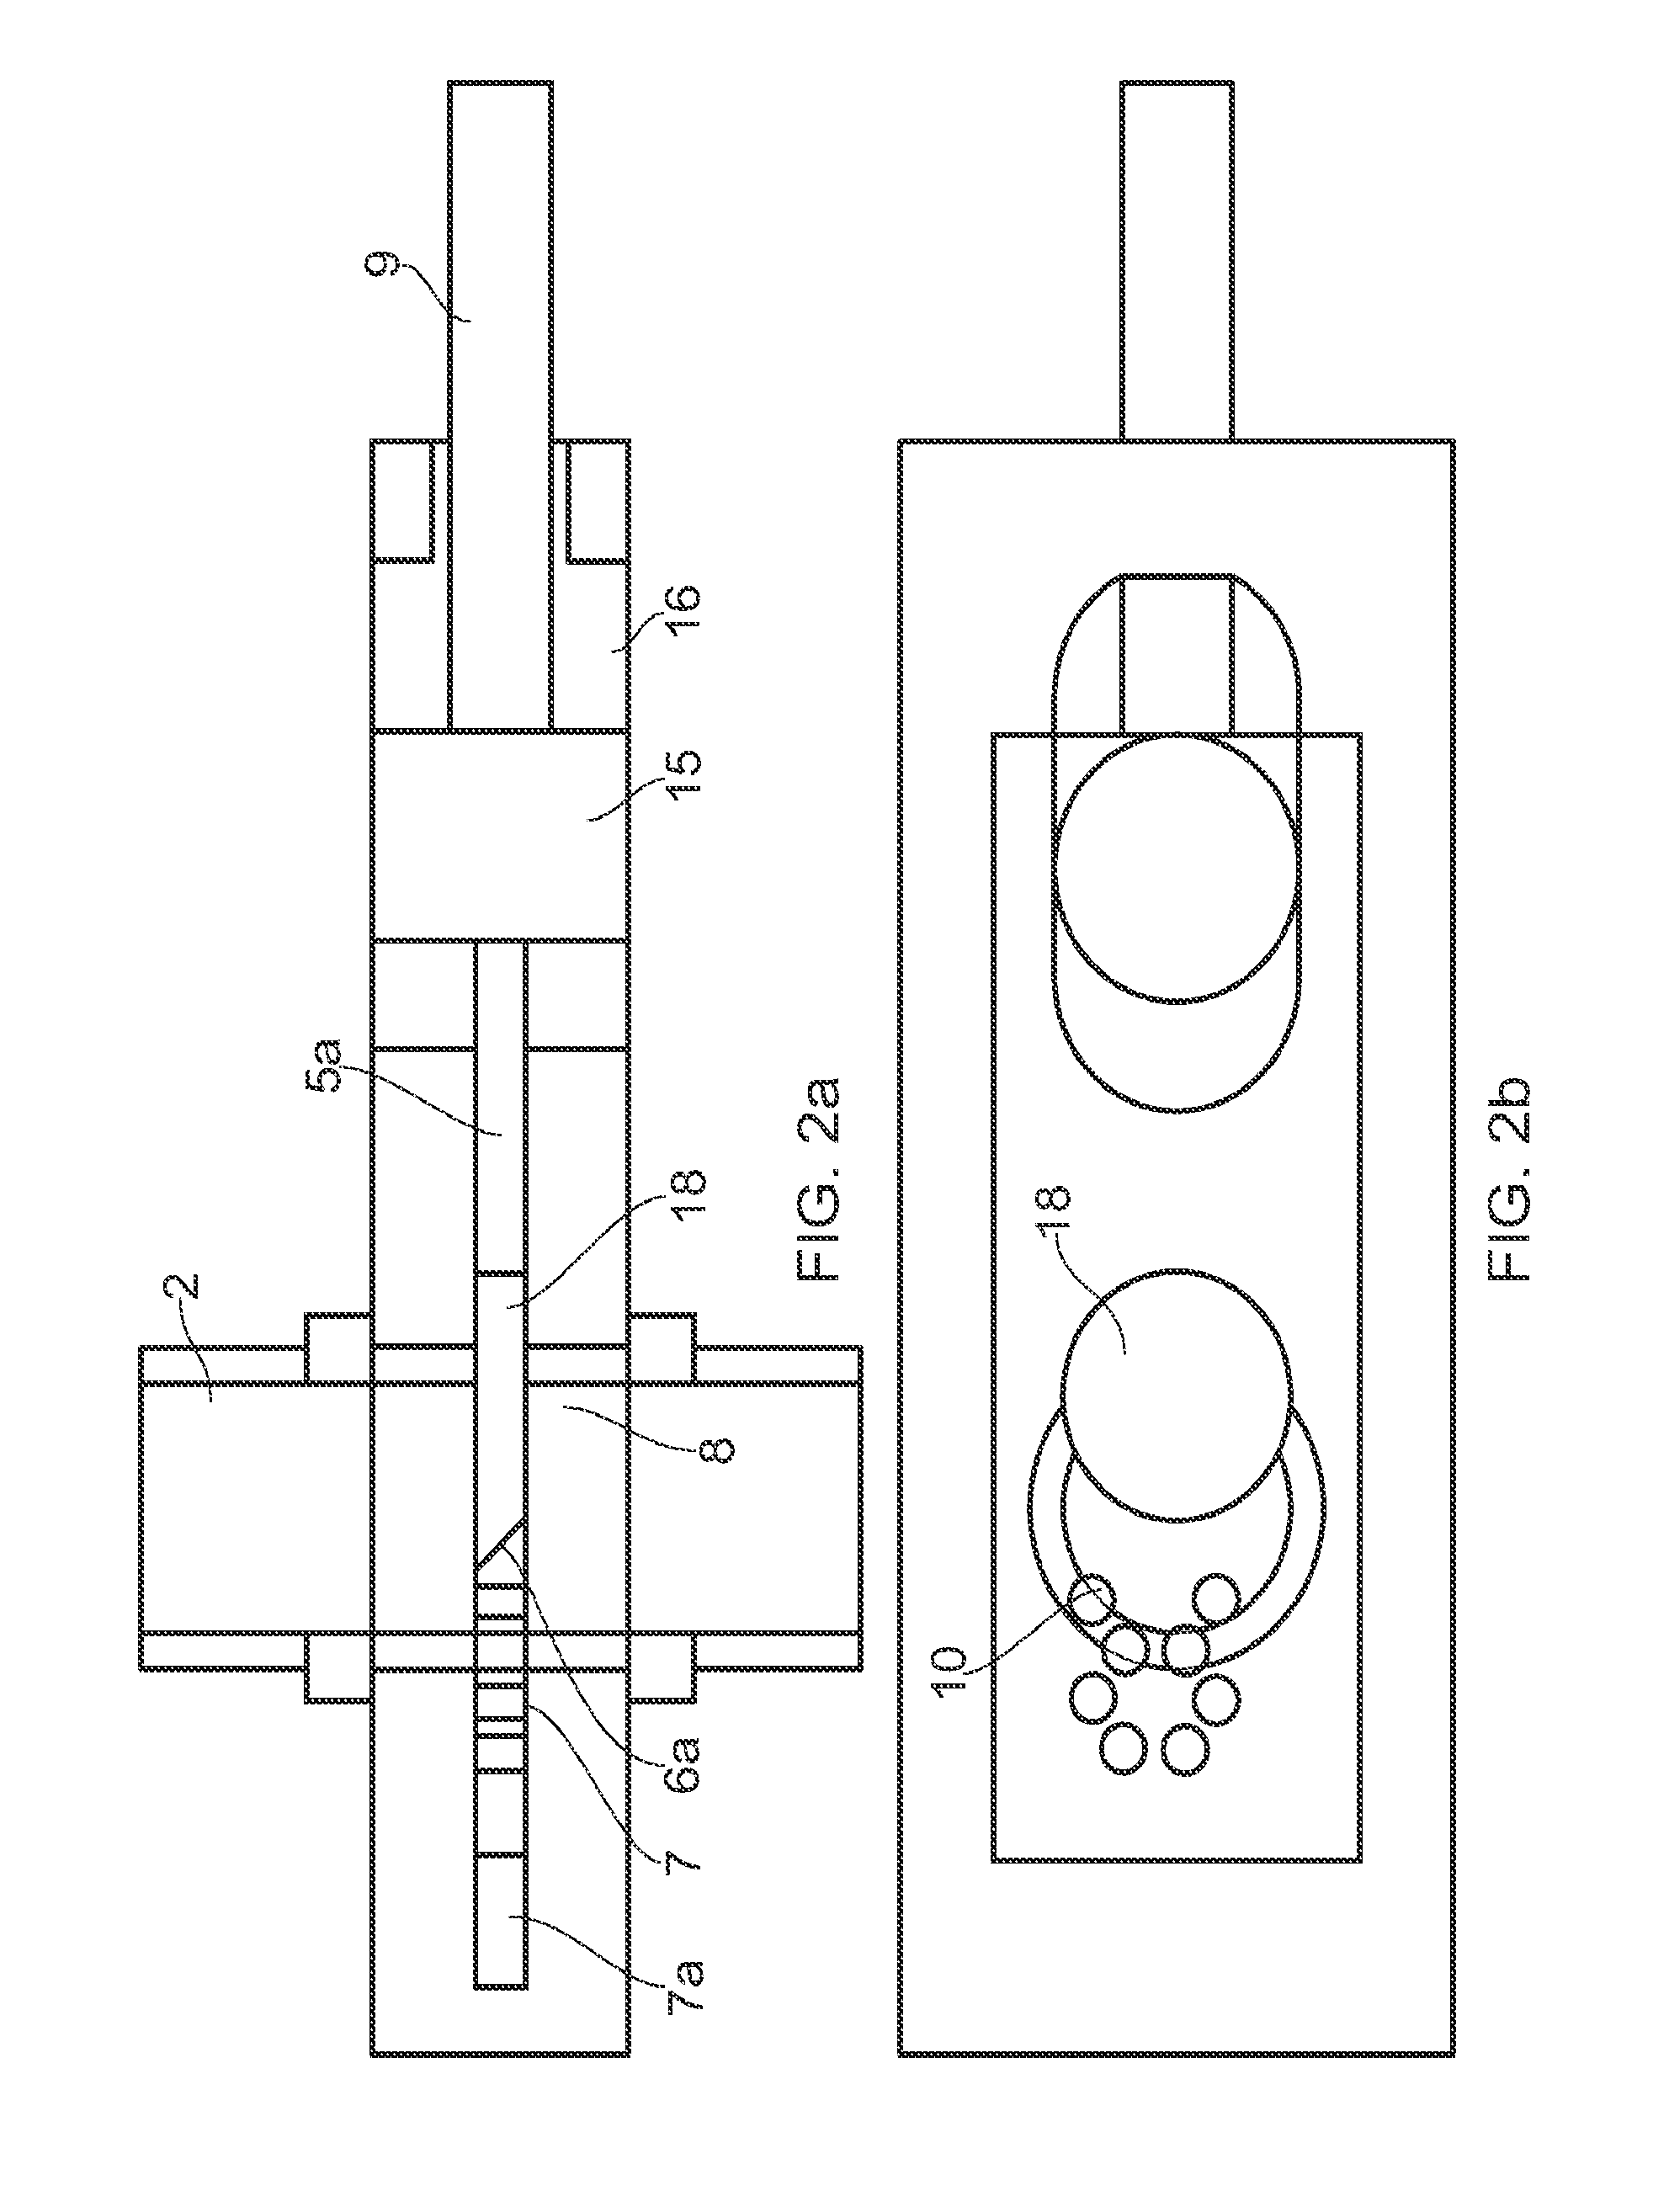 Gate valve assembly comprising a shear gate